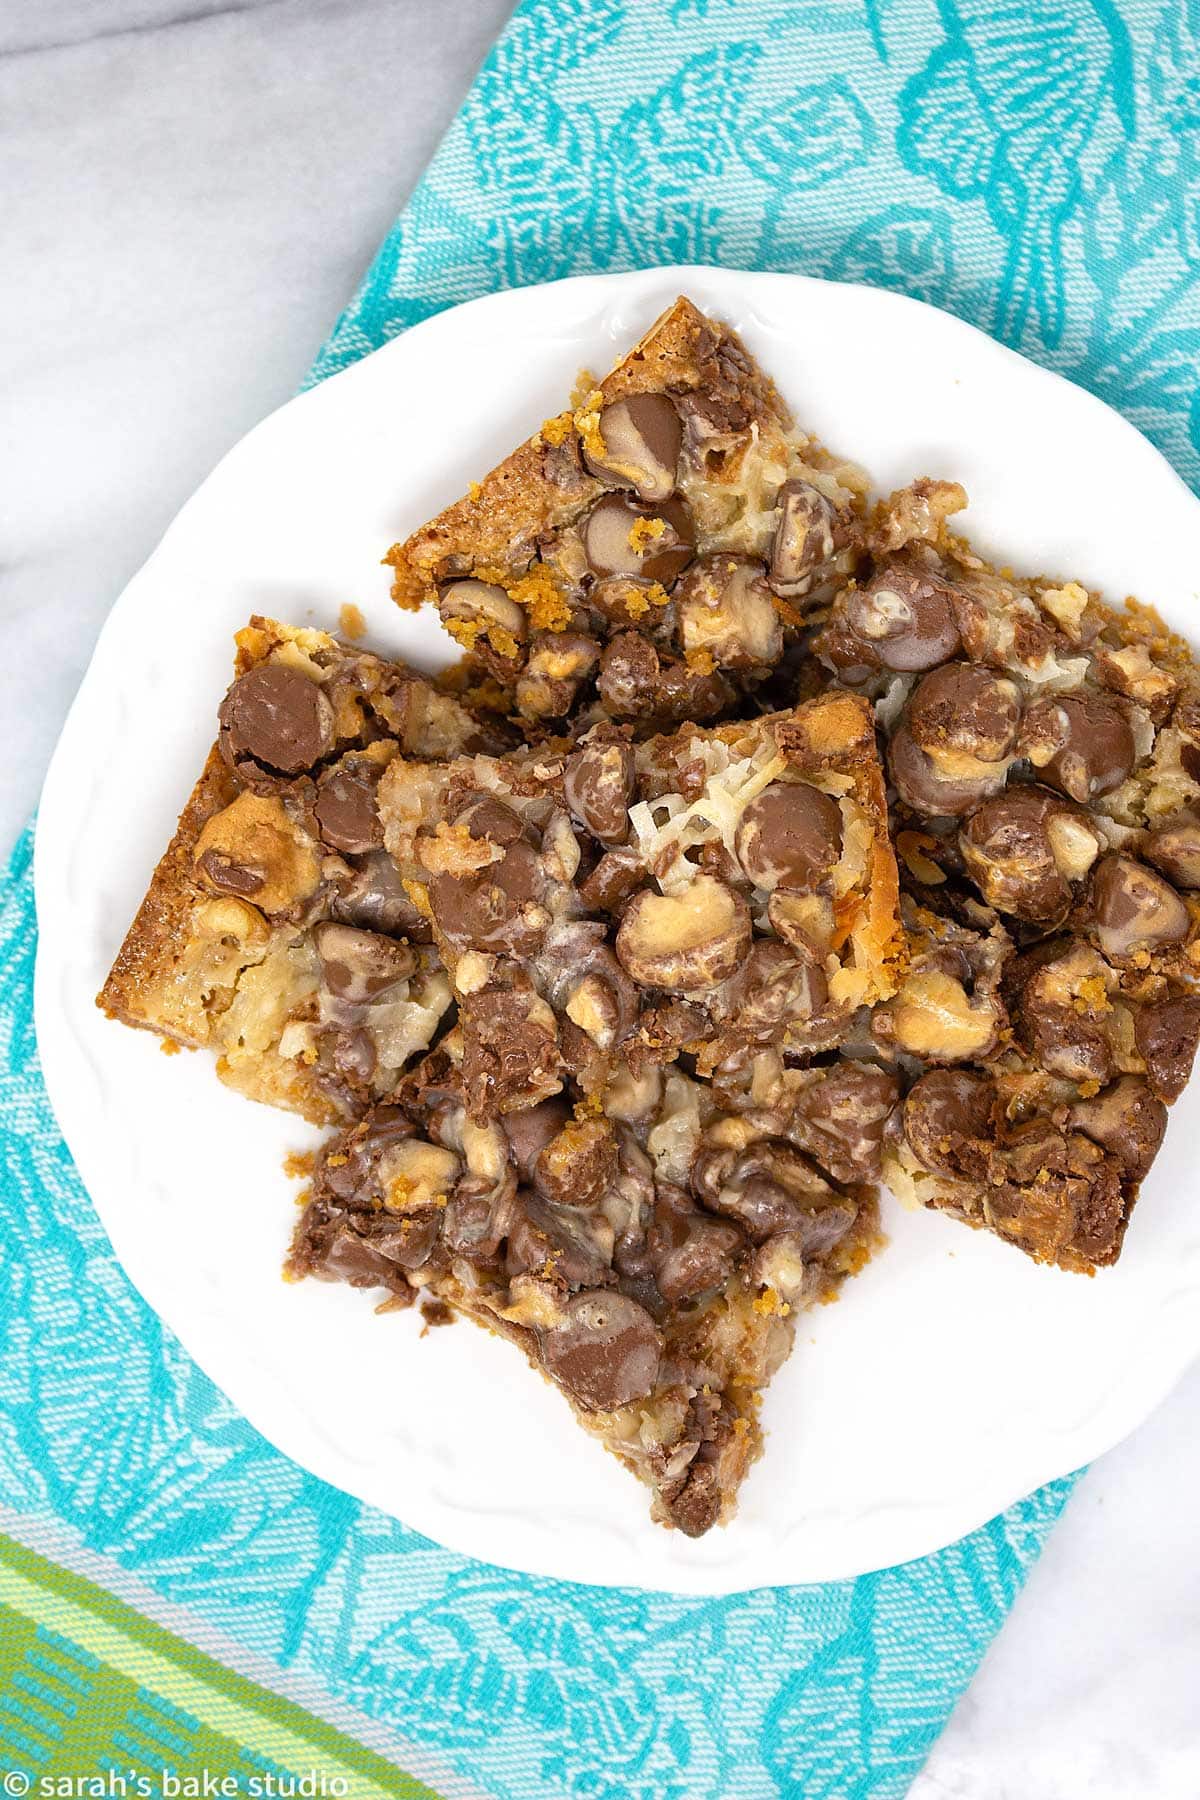 Malted Hello Dolly Bars - a delish graham cracker crust dressed to the nines with milk chocolate chips, coconut flakes, walnut pieces, and chopped Whoppers; it's a scrumptious whopper of a dessert bar.